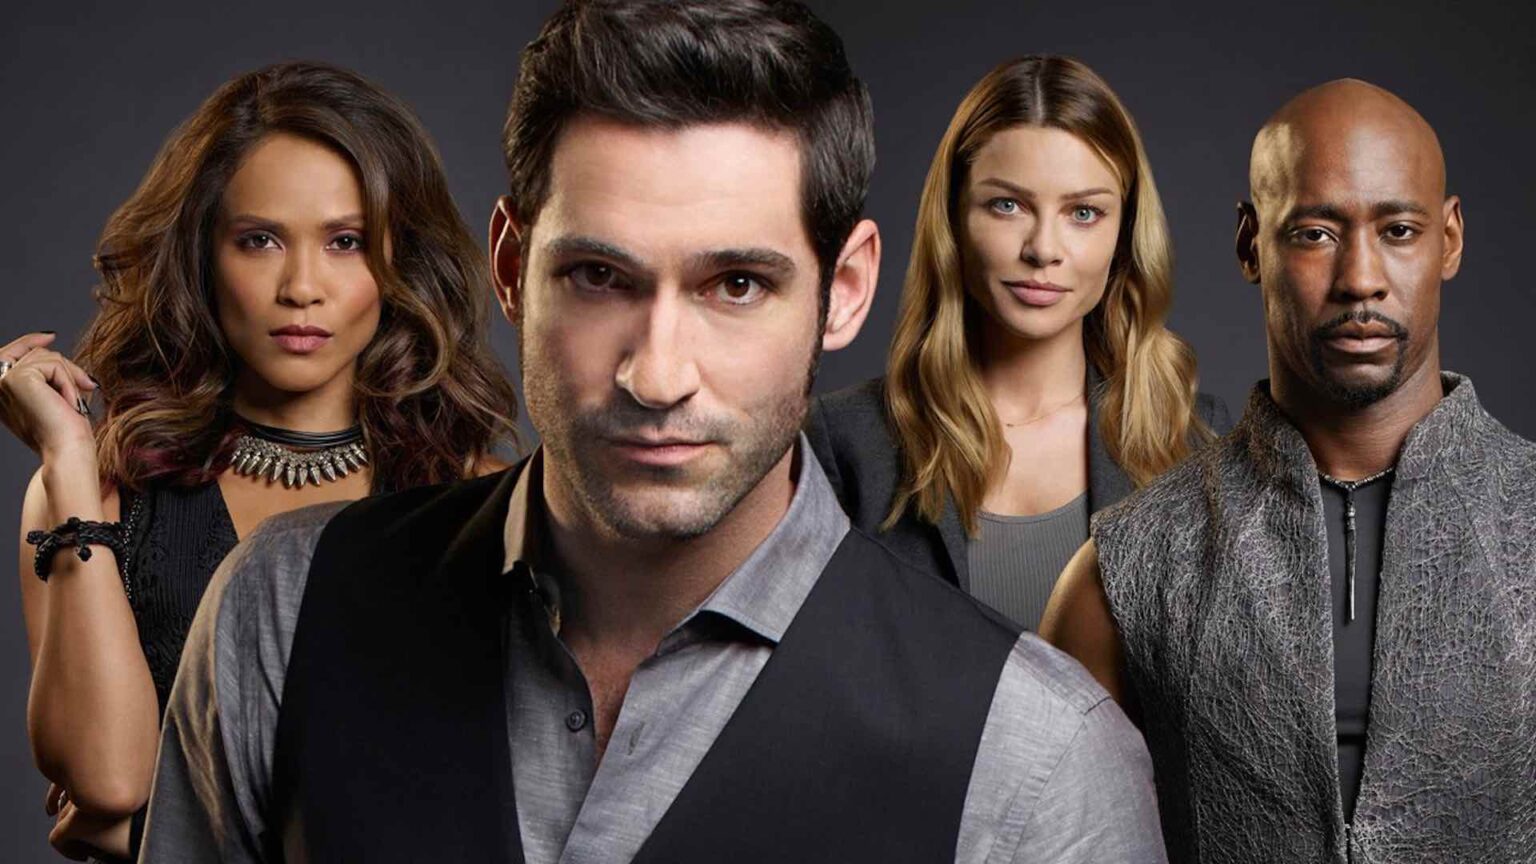 The Netflix show 'Lucifer' has five seasons and may get a sixth, with so much content things can be hard to keep track of. Here's a guide to help.